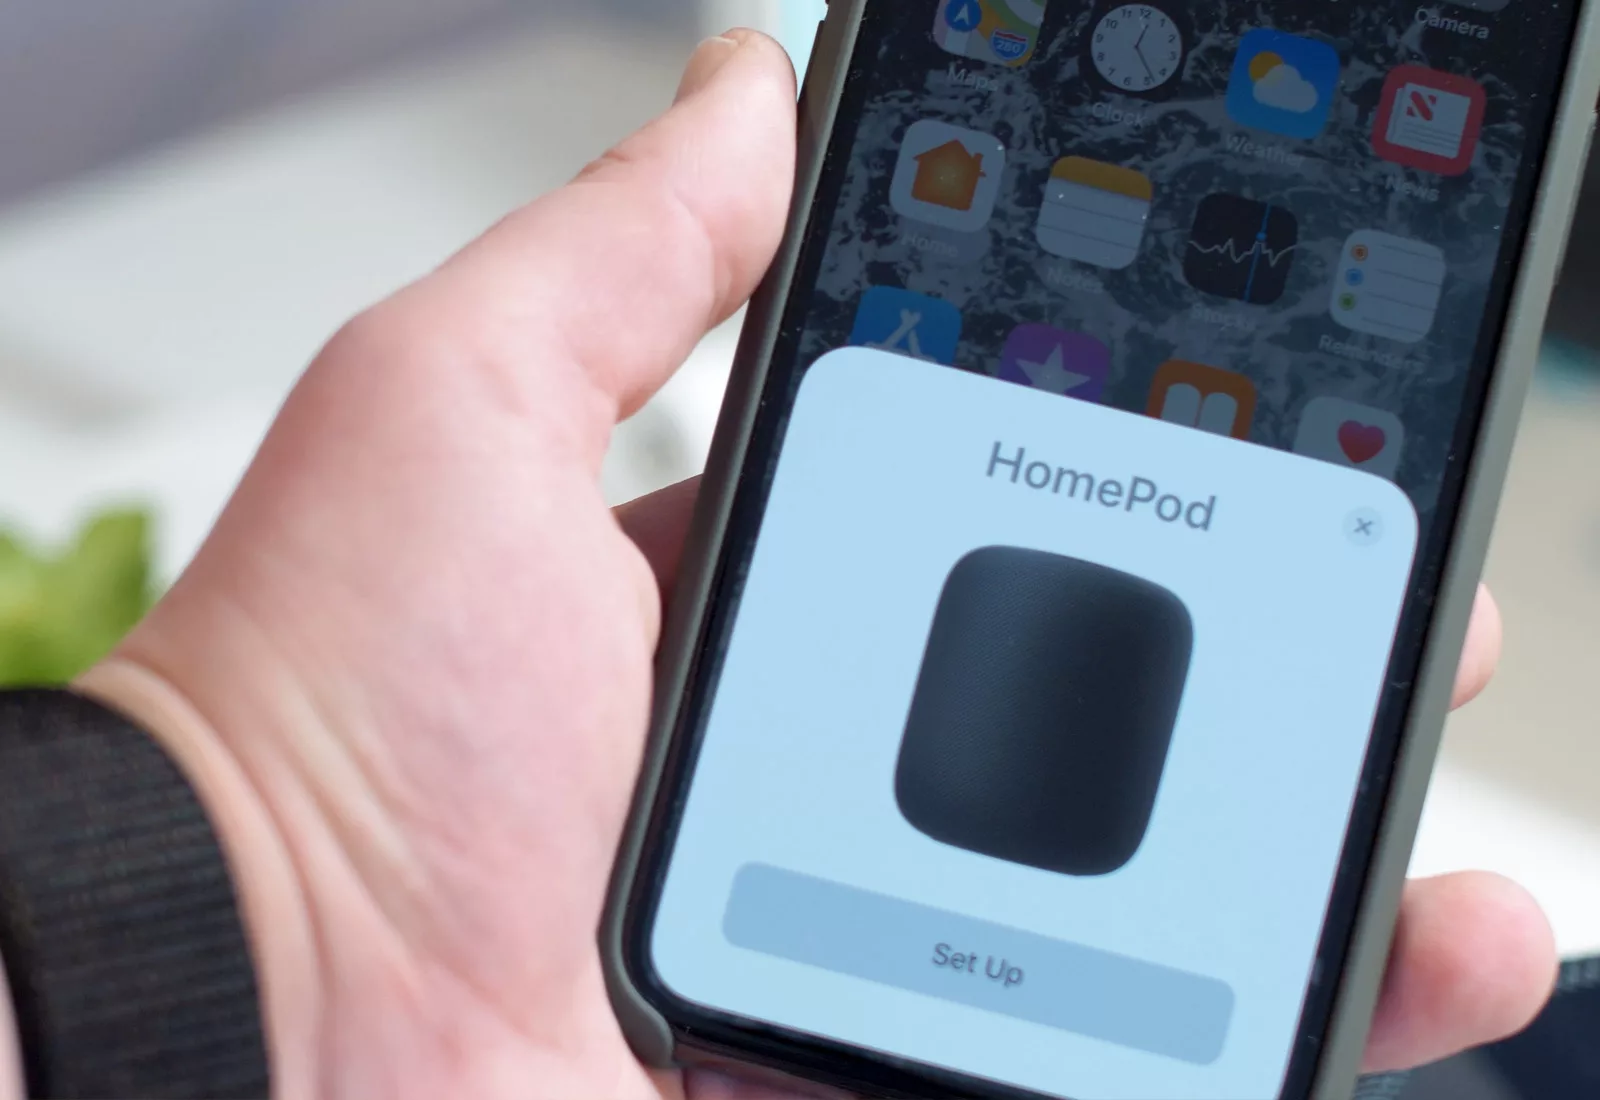 A person holding an iPhone prompting them to setup a HomePod